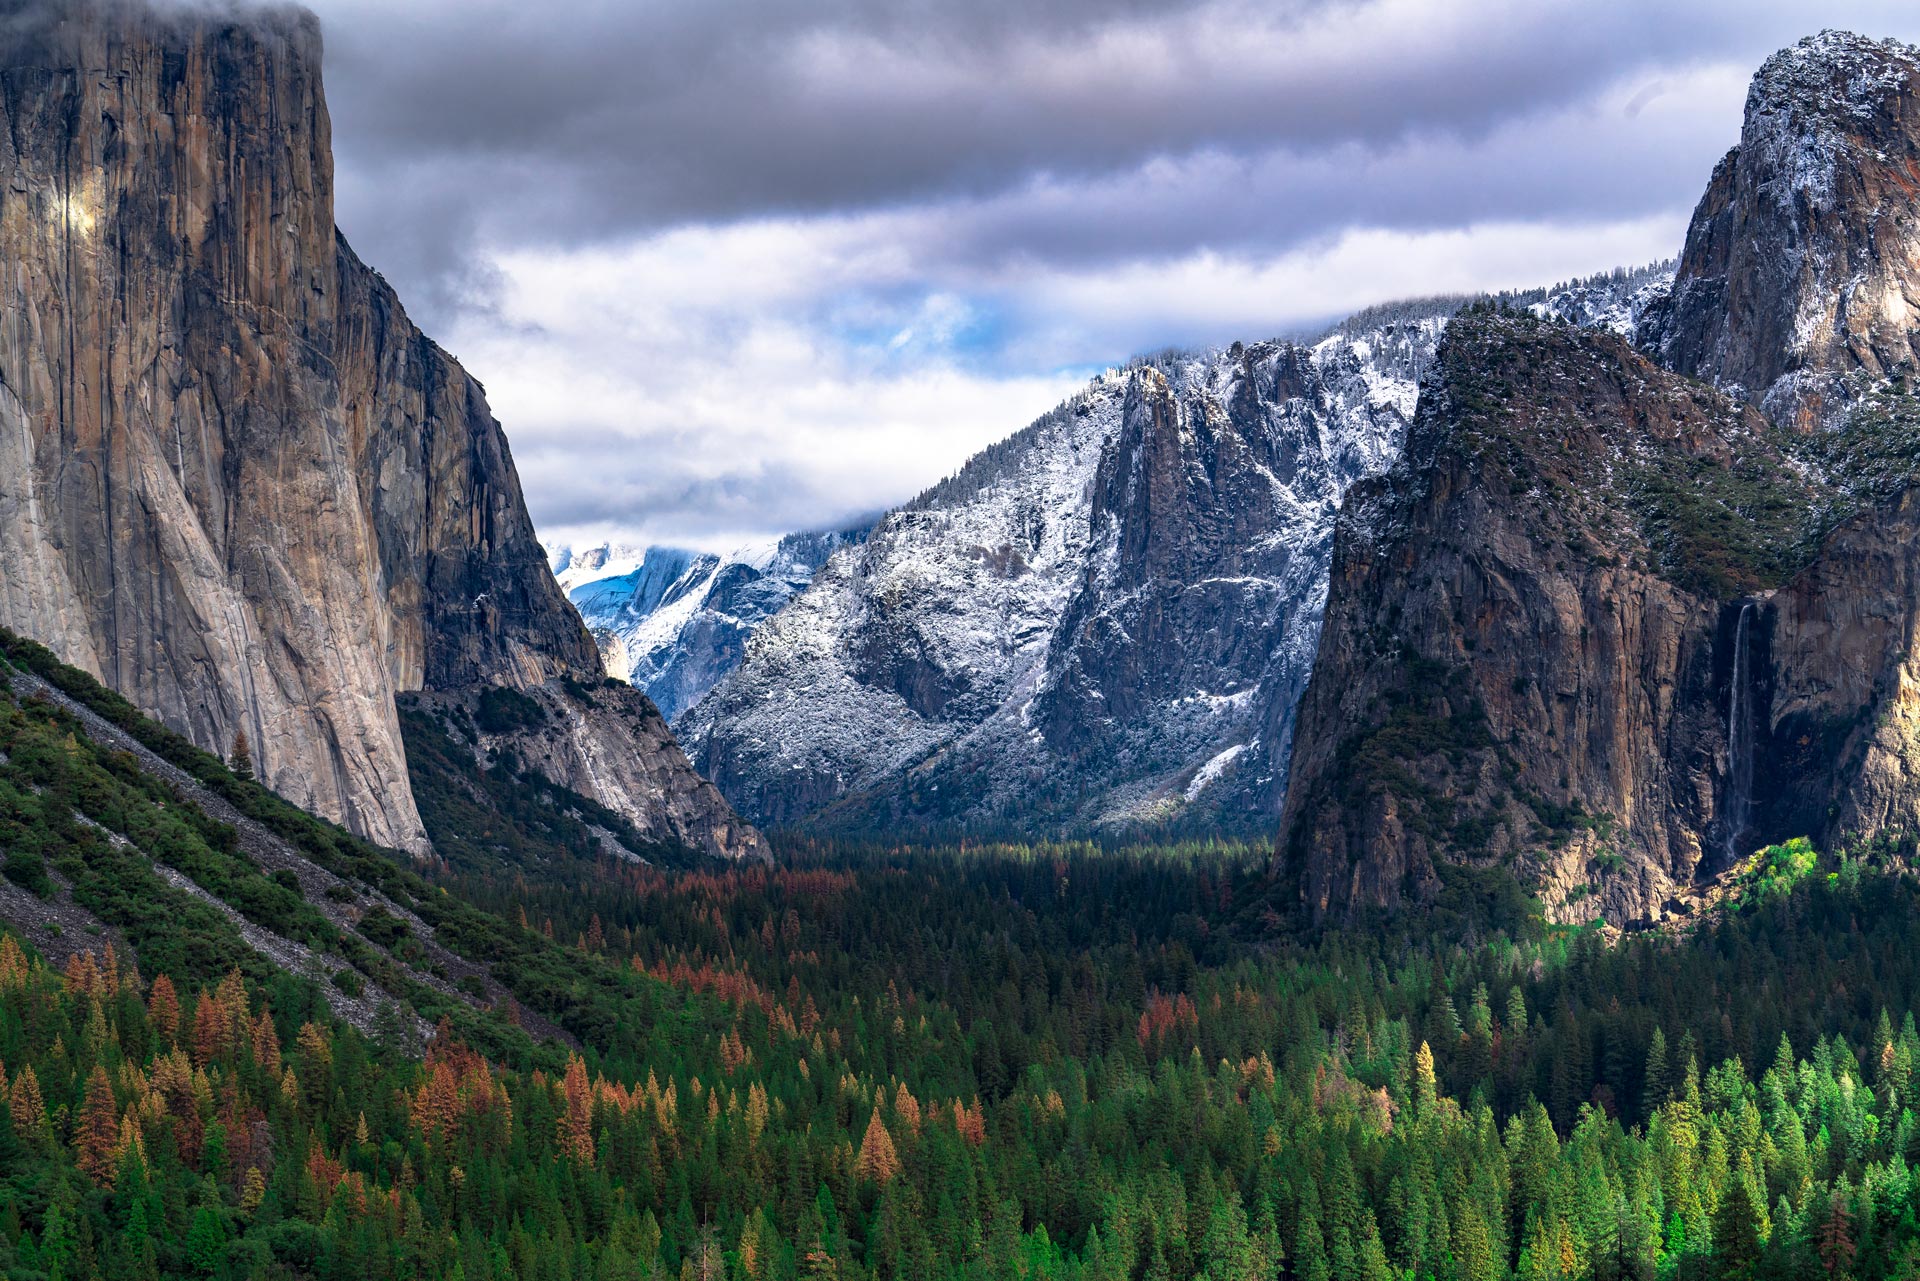 us national parks ranked, yosemite valley